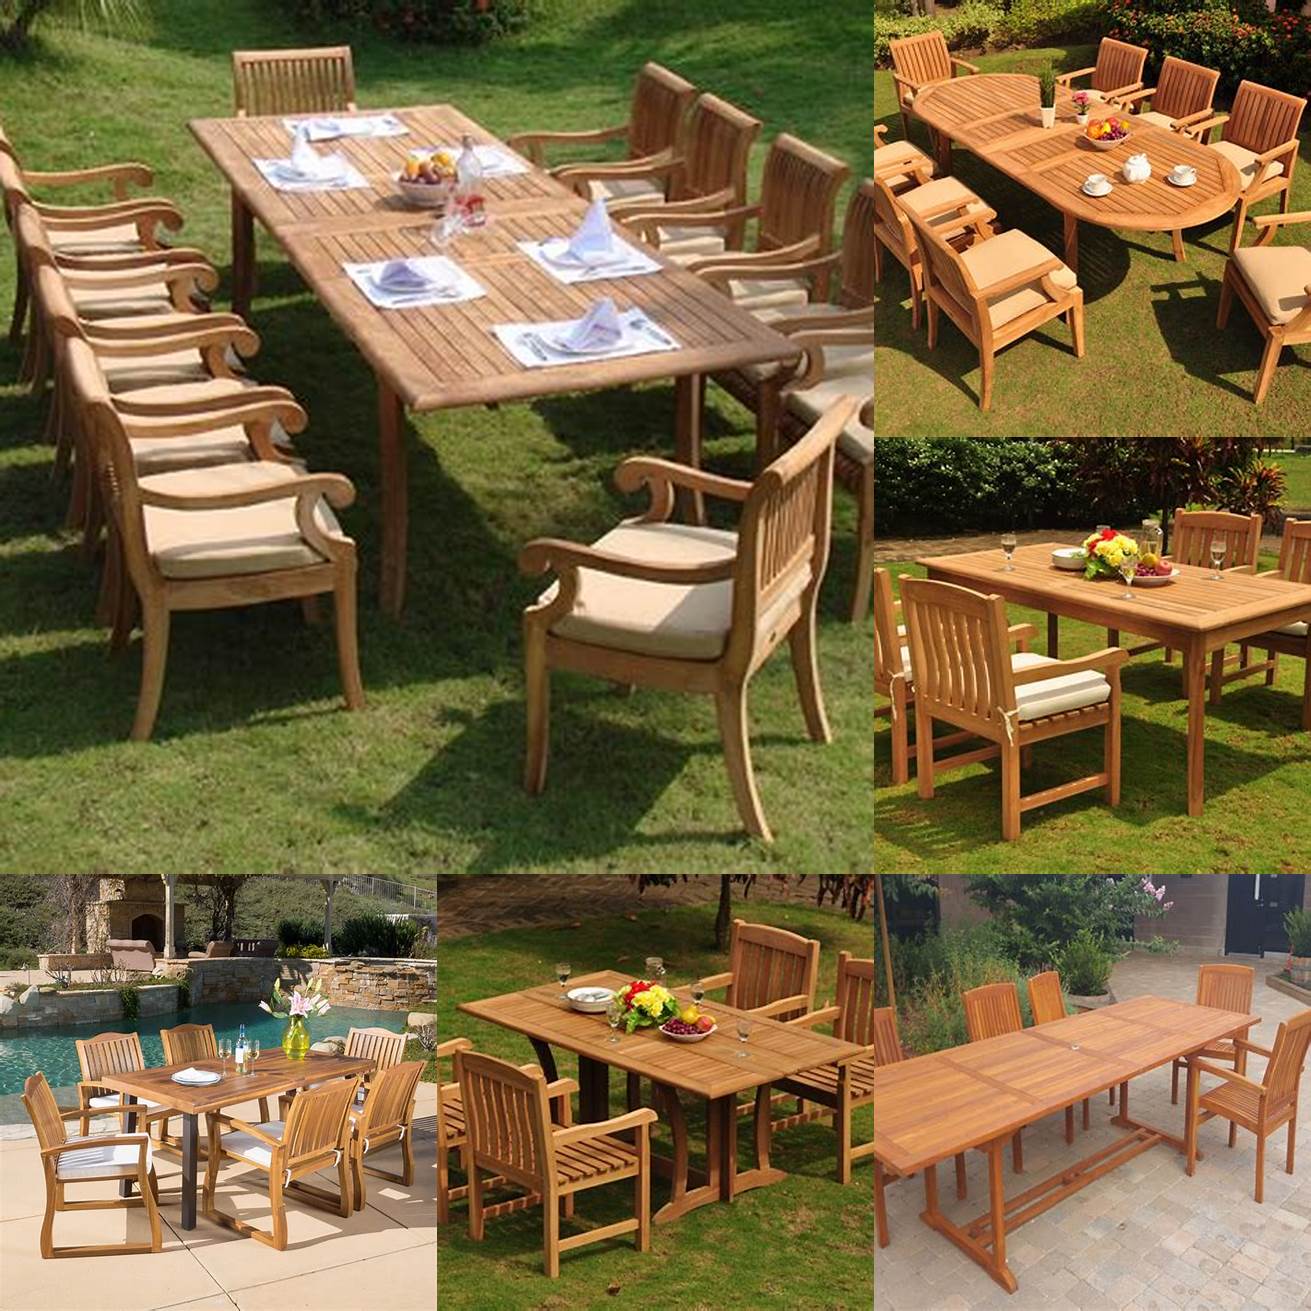 Pictures of Fish Tales Teak Furniture in Different Settings